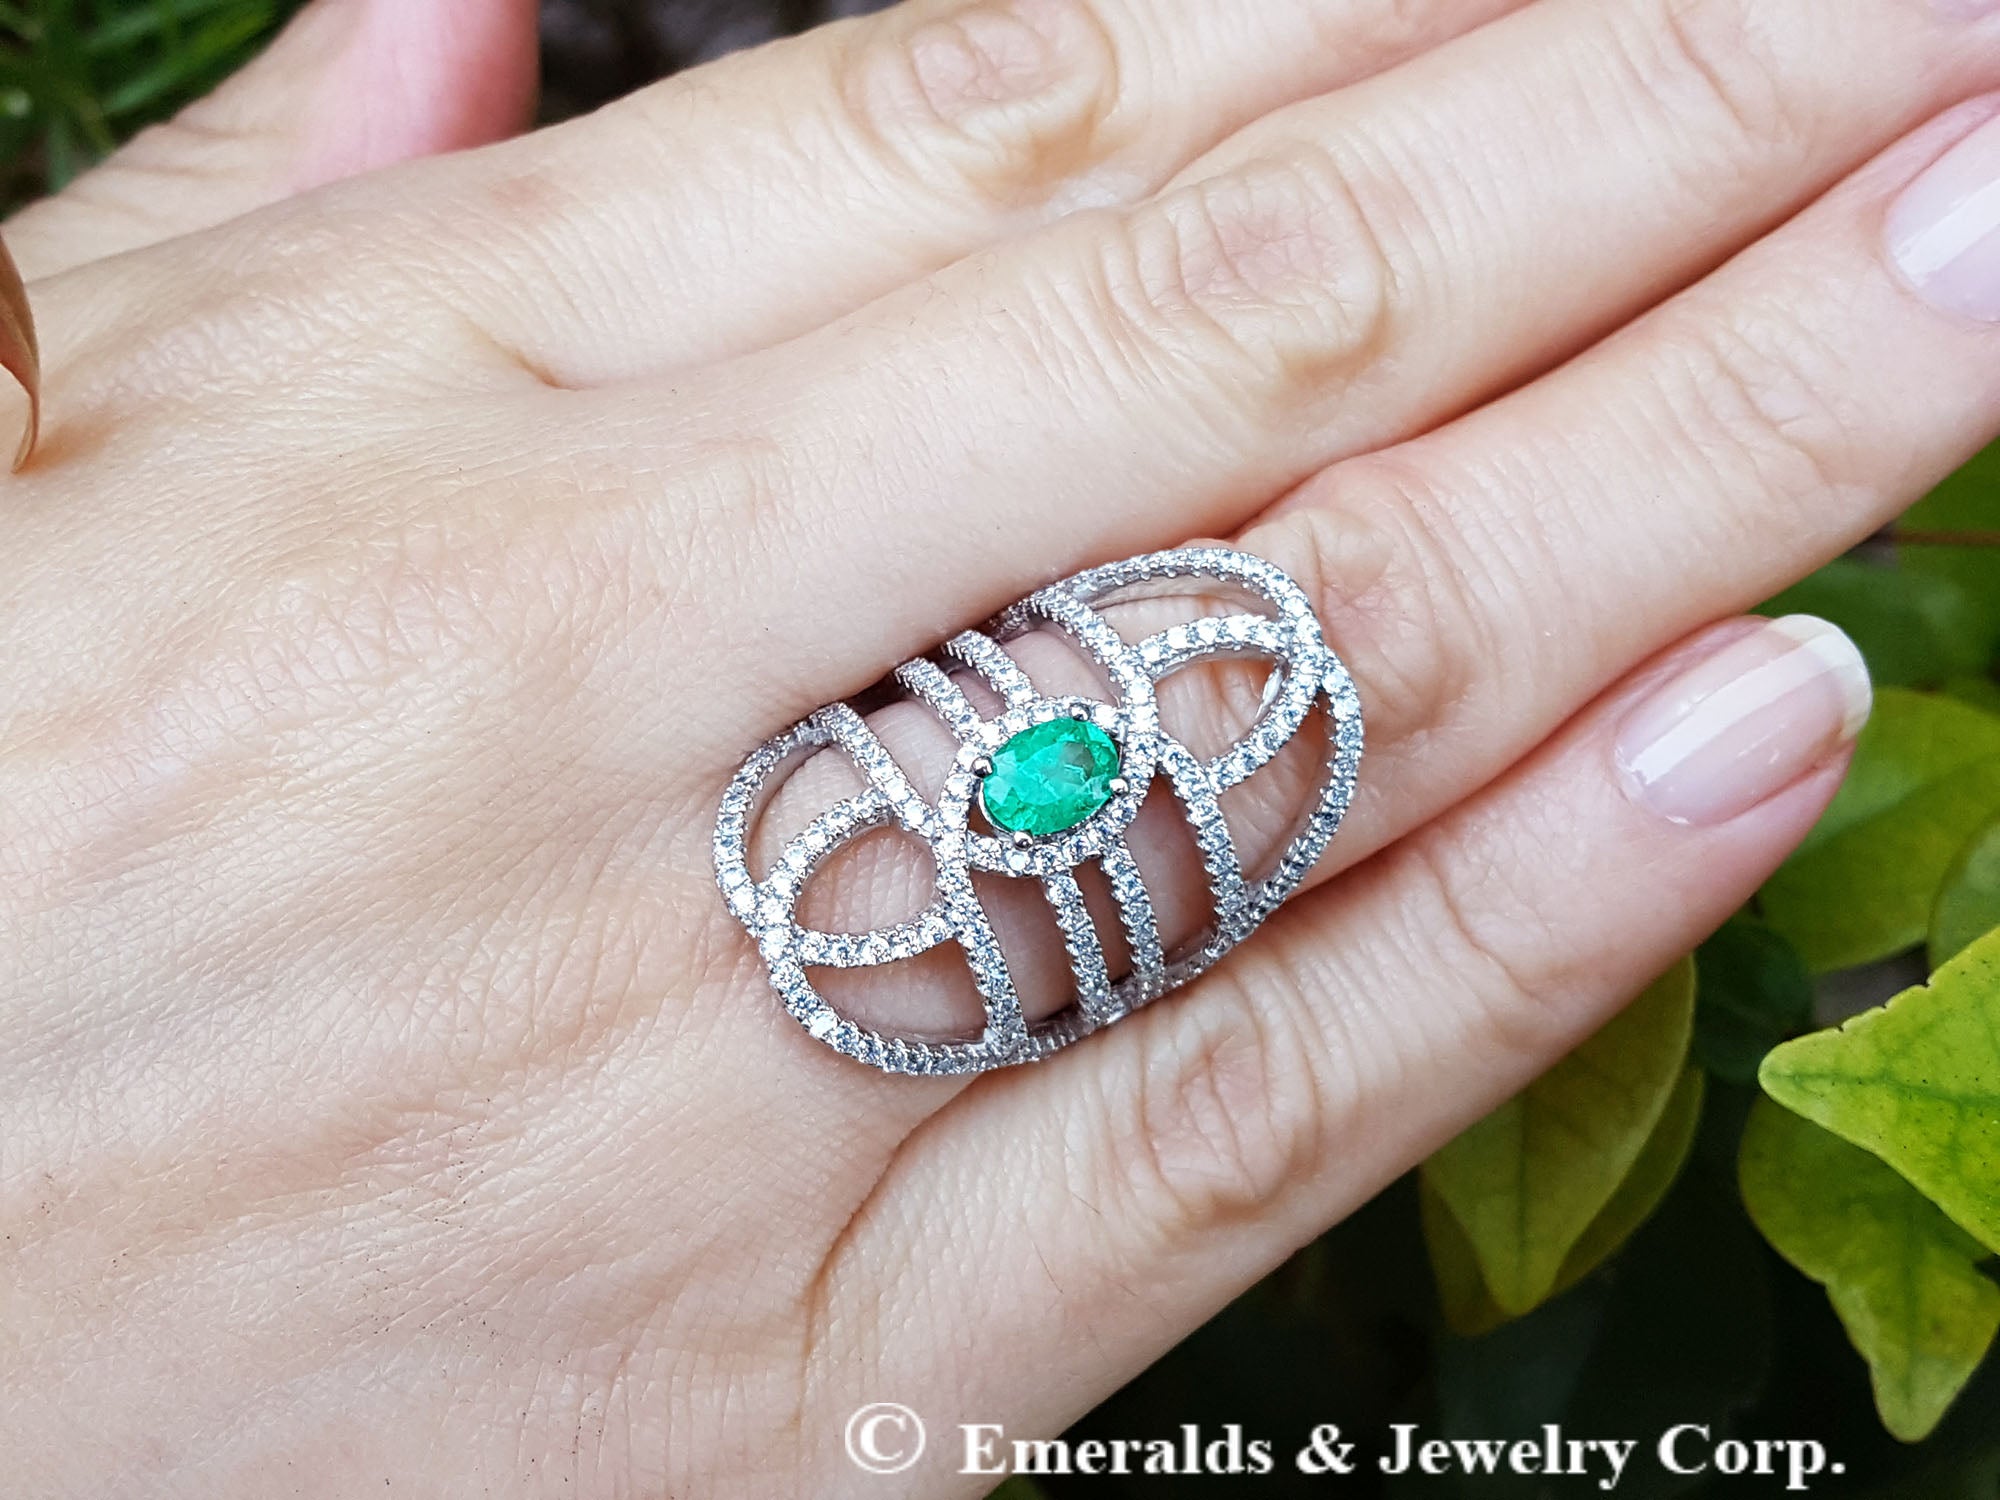 Inexpensive Women’s Natural emerald silver ring